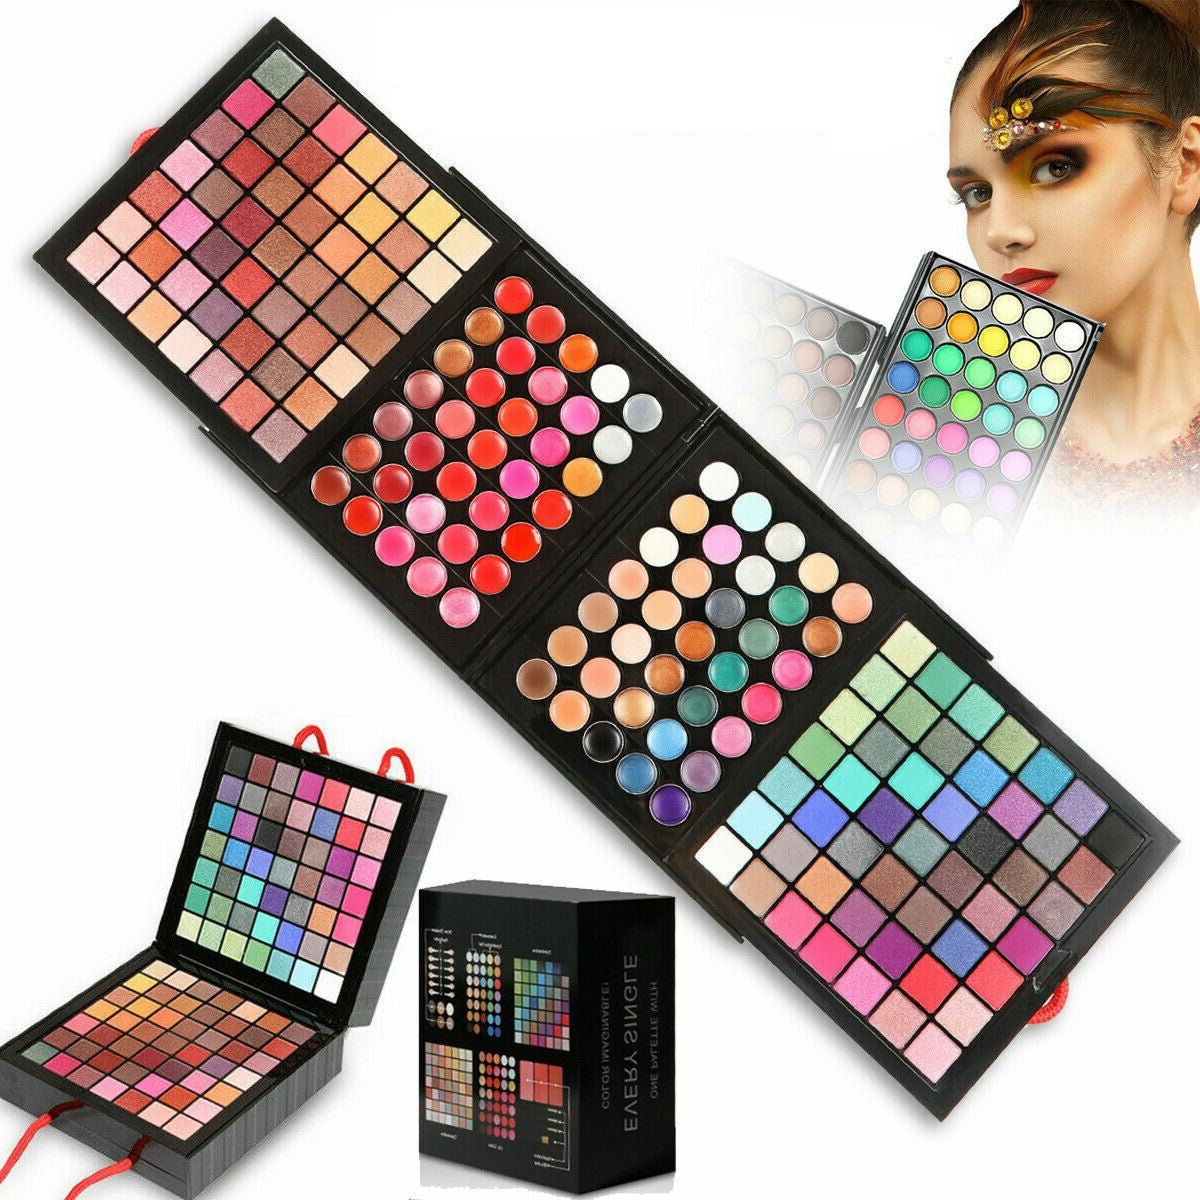 177-Color Makeup Kit: Cosmetic Set for Girls Featuring Eyeshadow Palette, Lipsticks, and Stylish Beauty Case